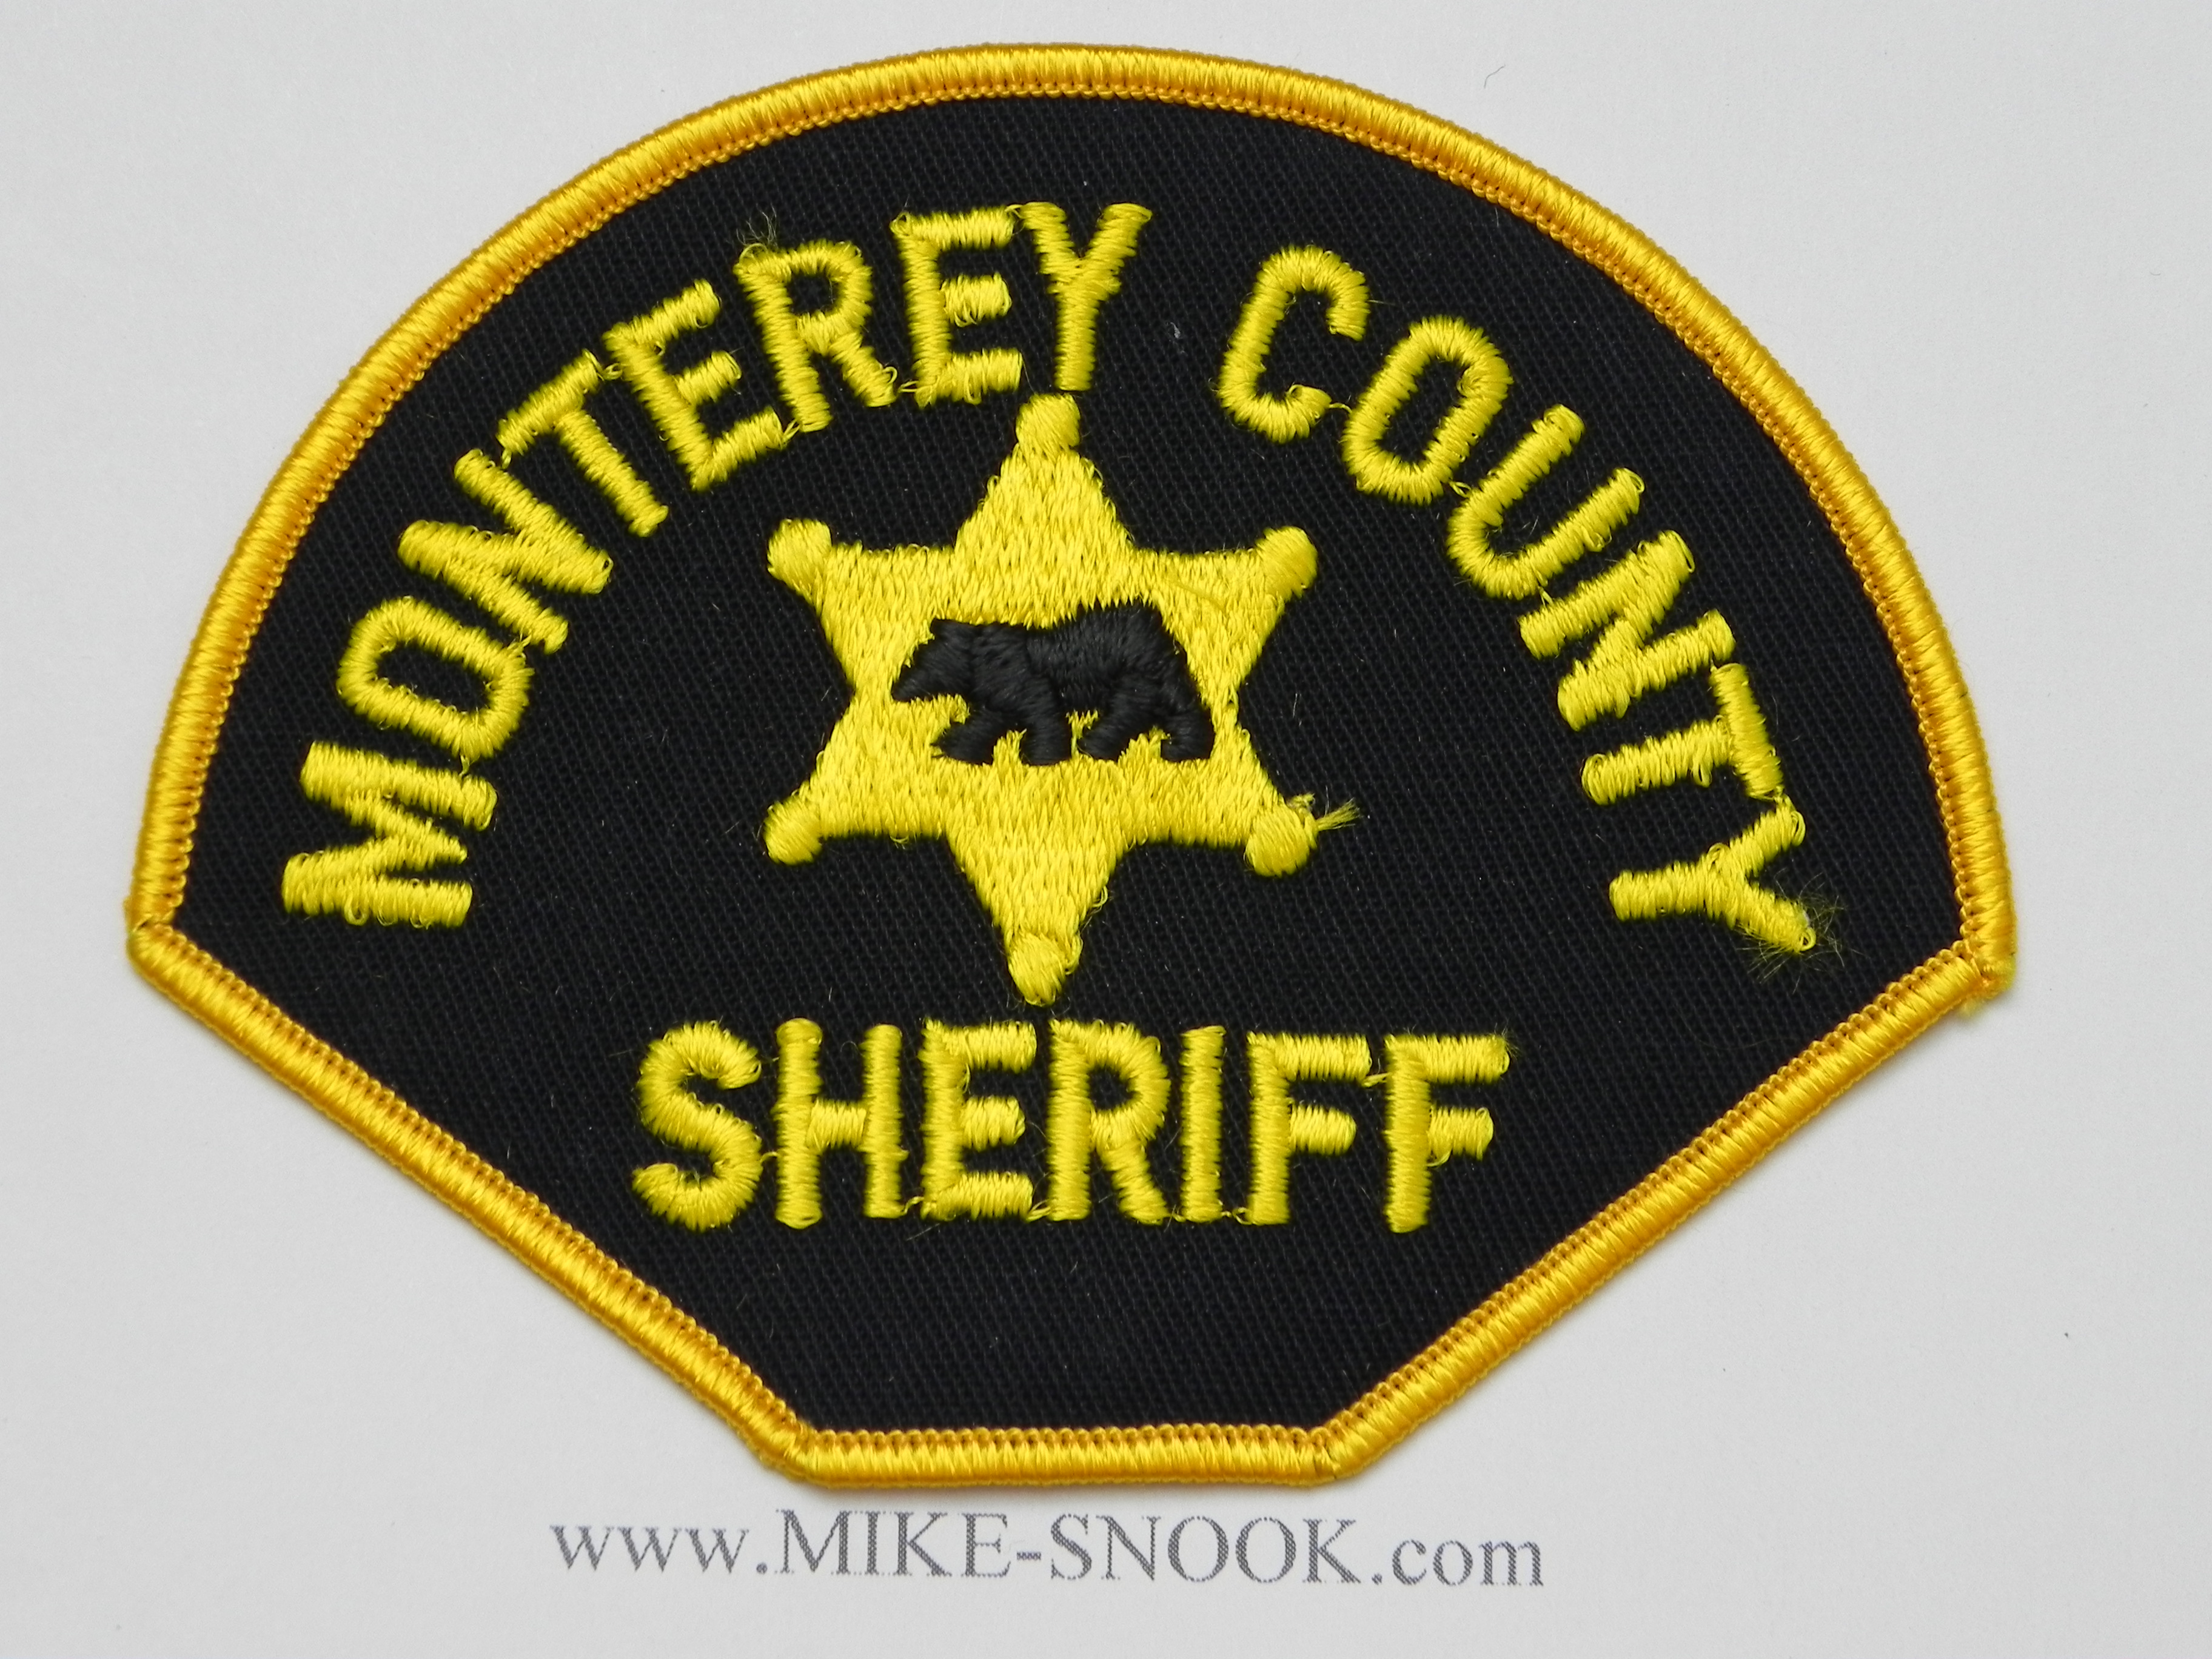 KINGS COUNTY SHERIFF CALIFORNIA POLICE DIVE TEAM PATCH